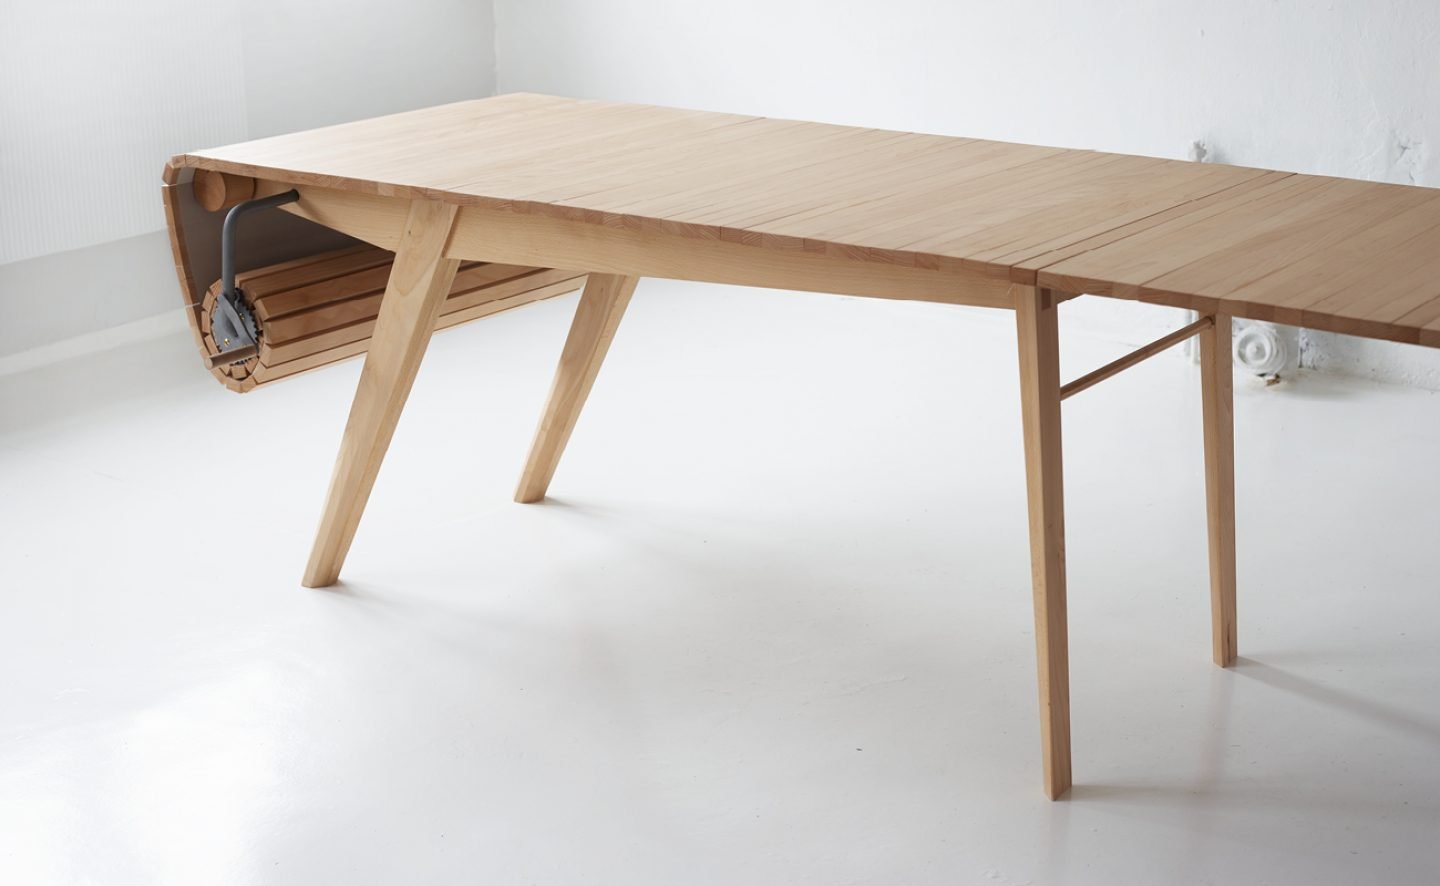 Design_Roll-out_Table_Marcus_Voraa_IGNANT_1